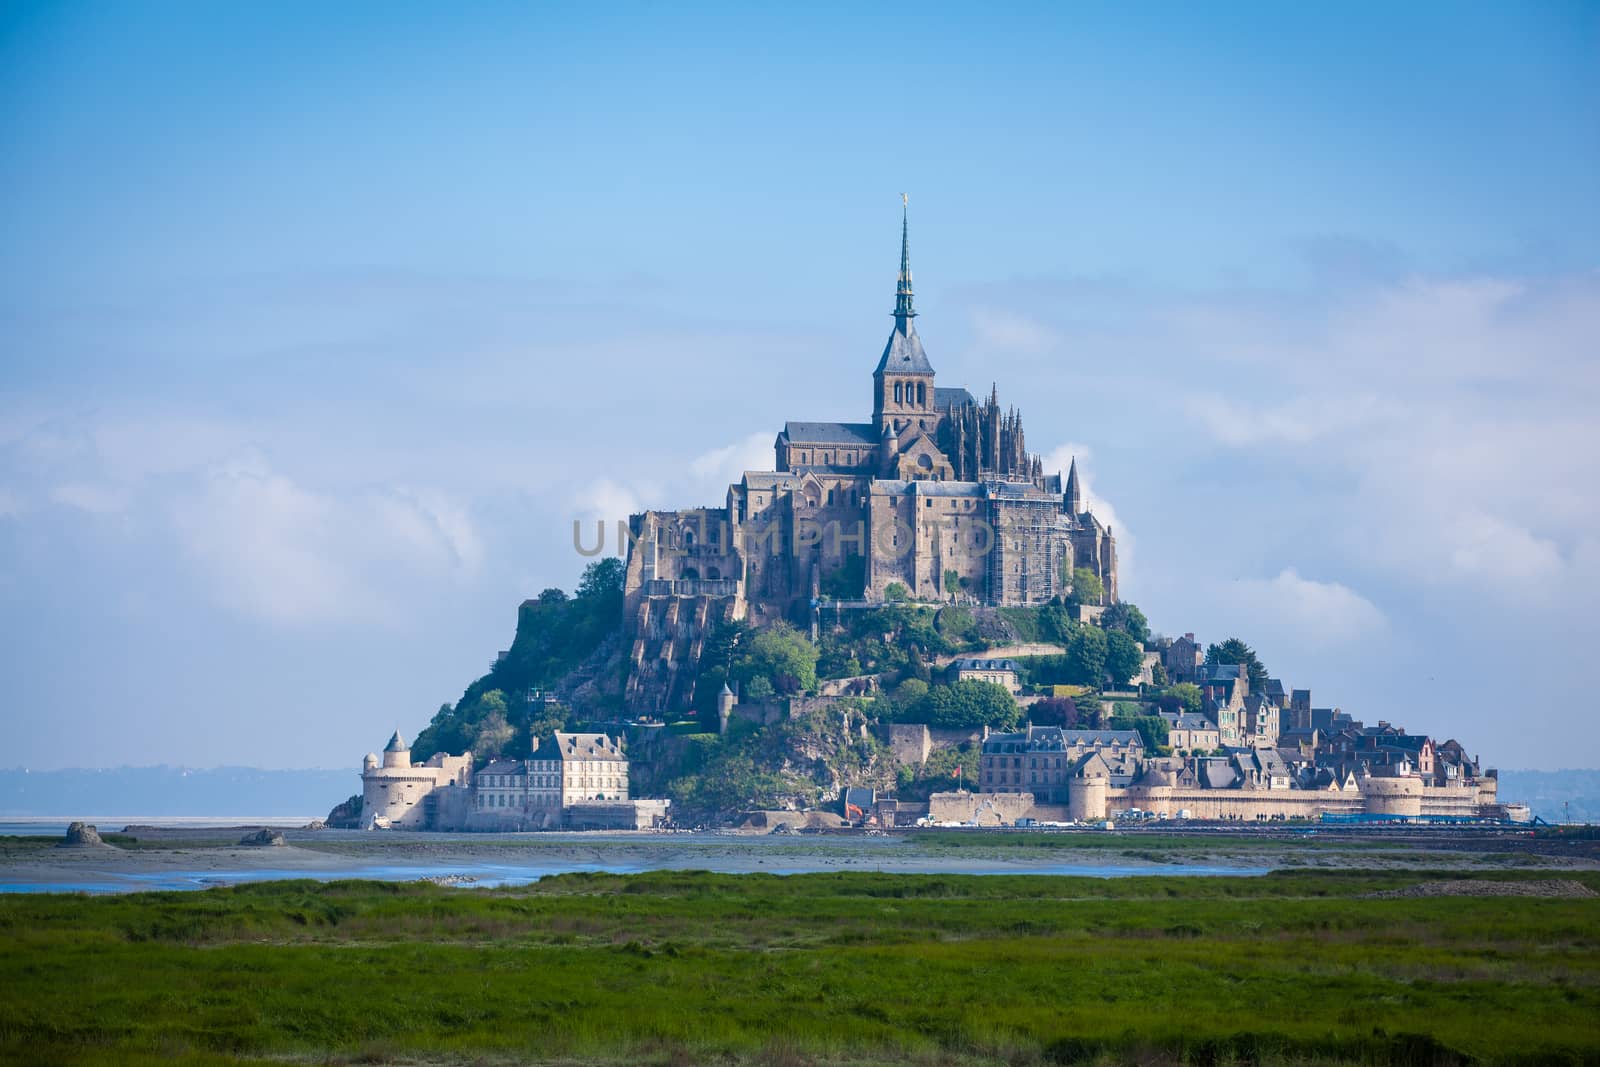 Mont St. Michel, the monastery on an island in Normandy